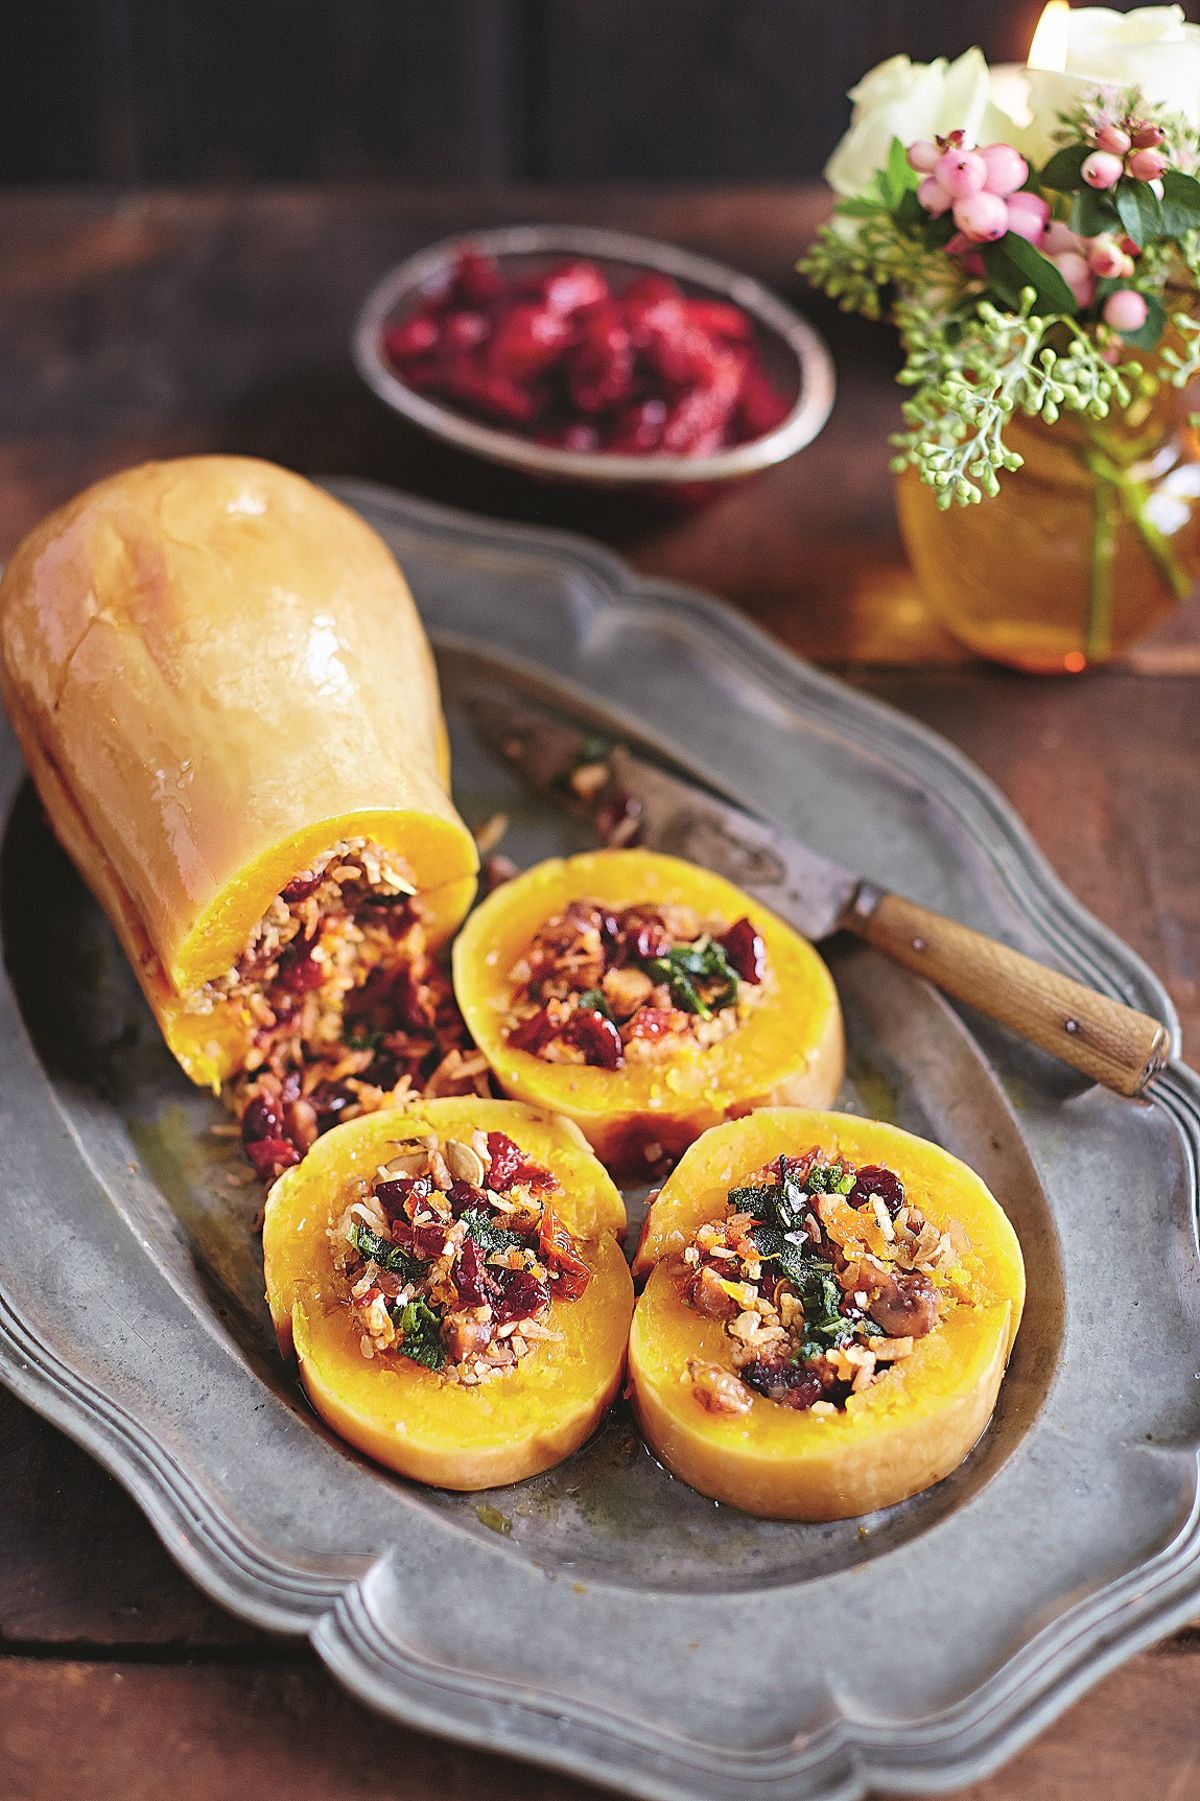 Baked Squash Stuffed with Nutty Cranberry-spiked Rice